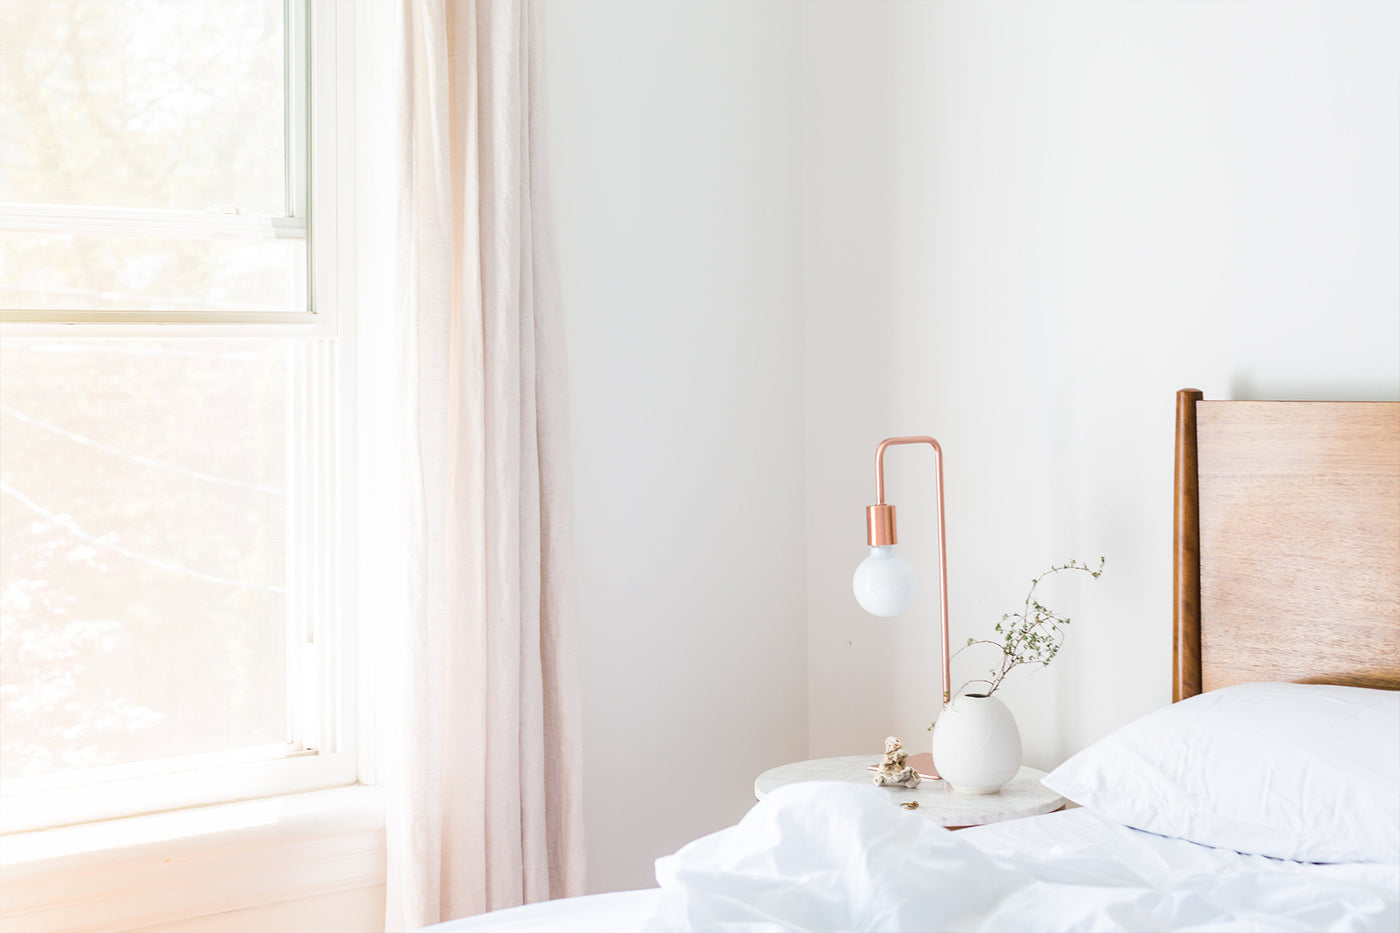 6 Ways to Make Your Bedroom More Eco-Friendly